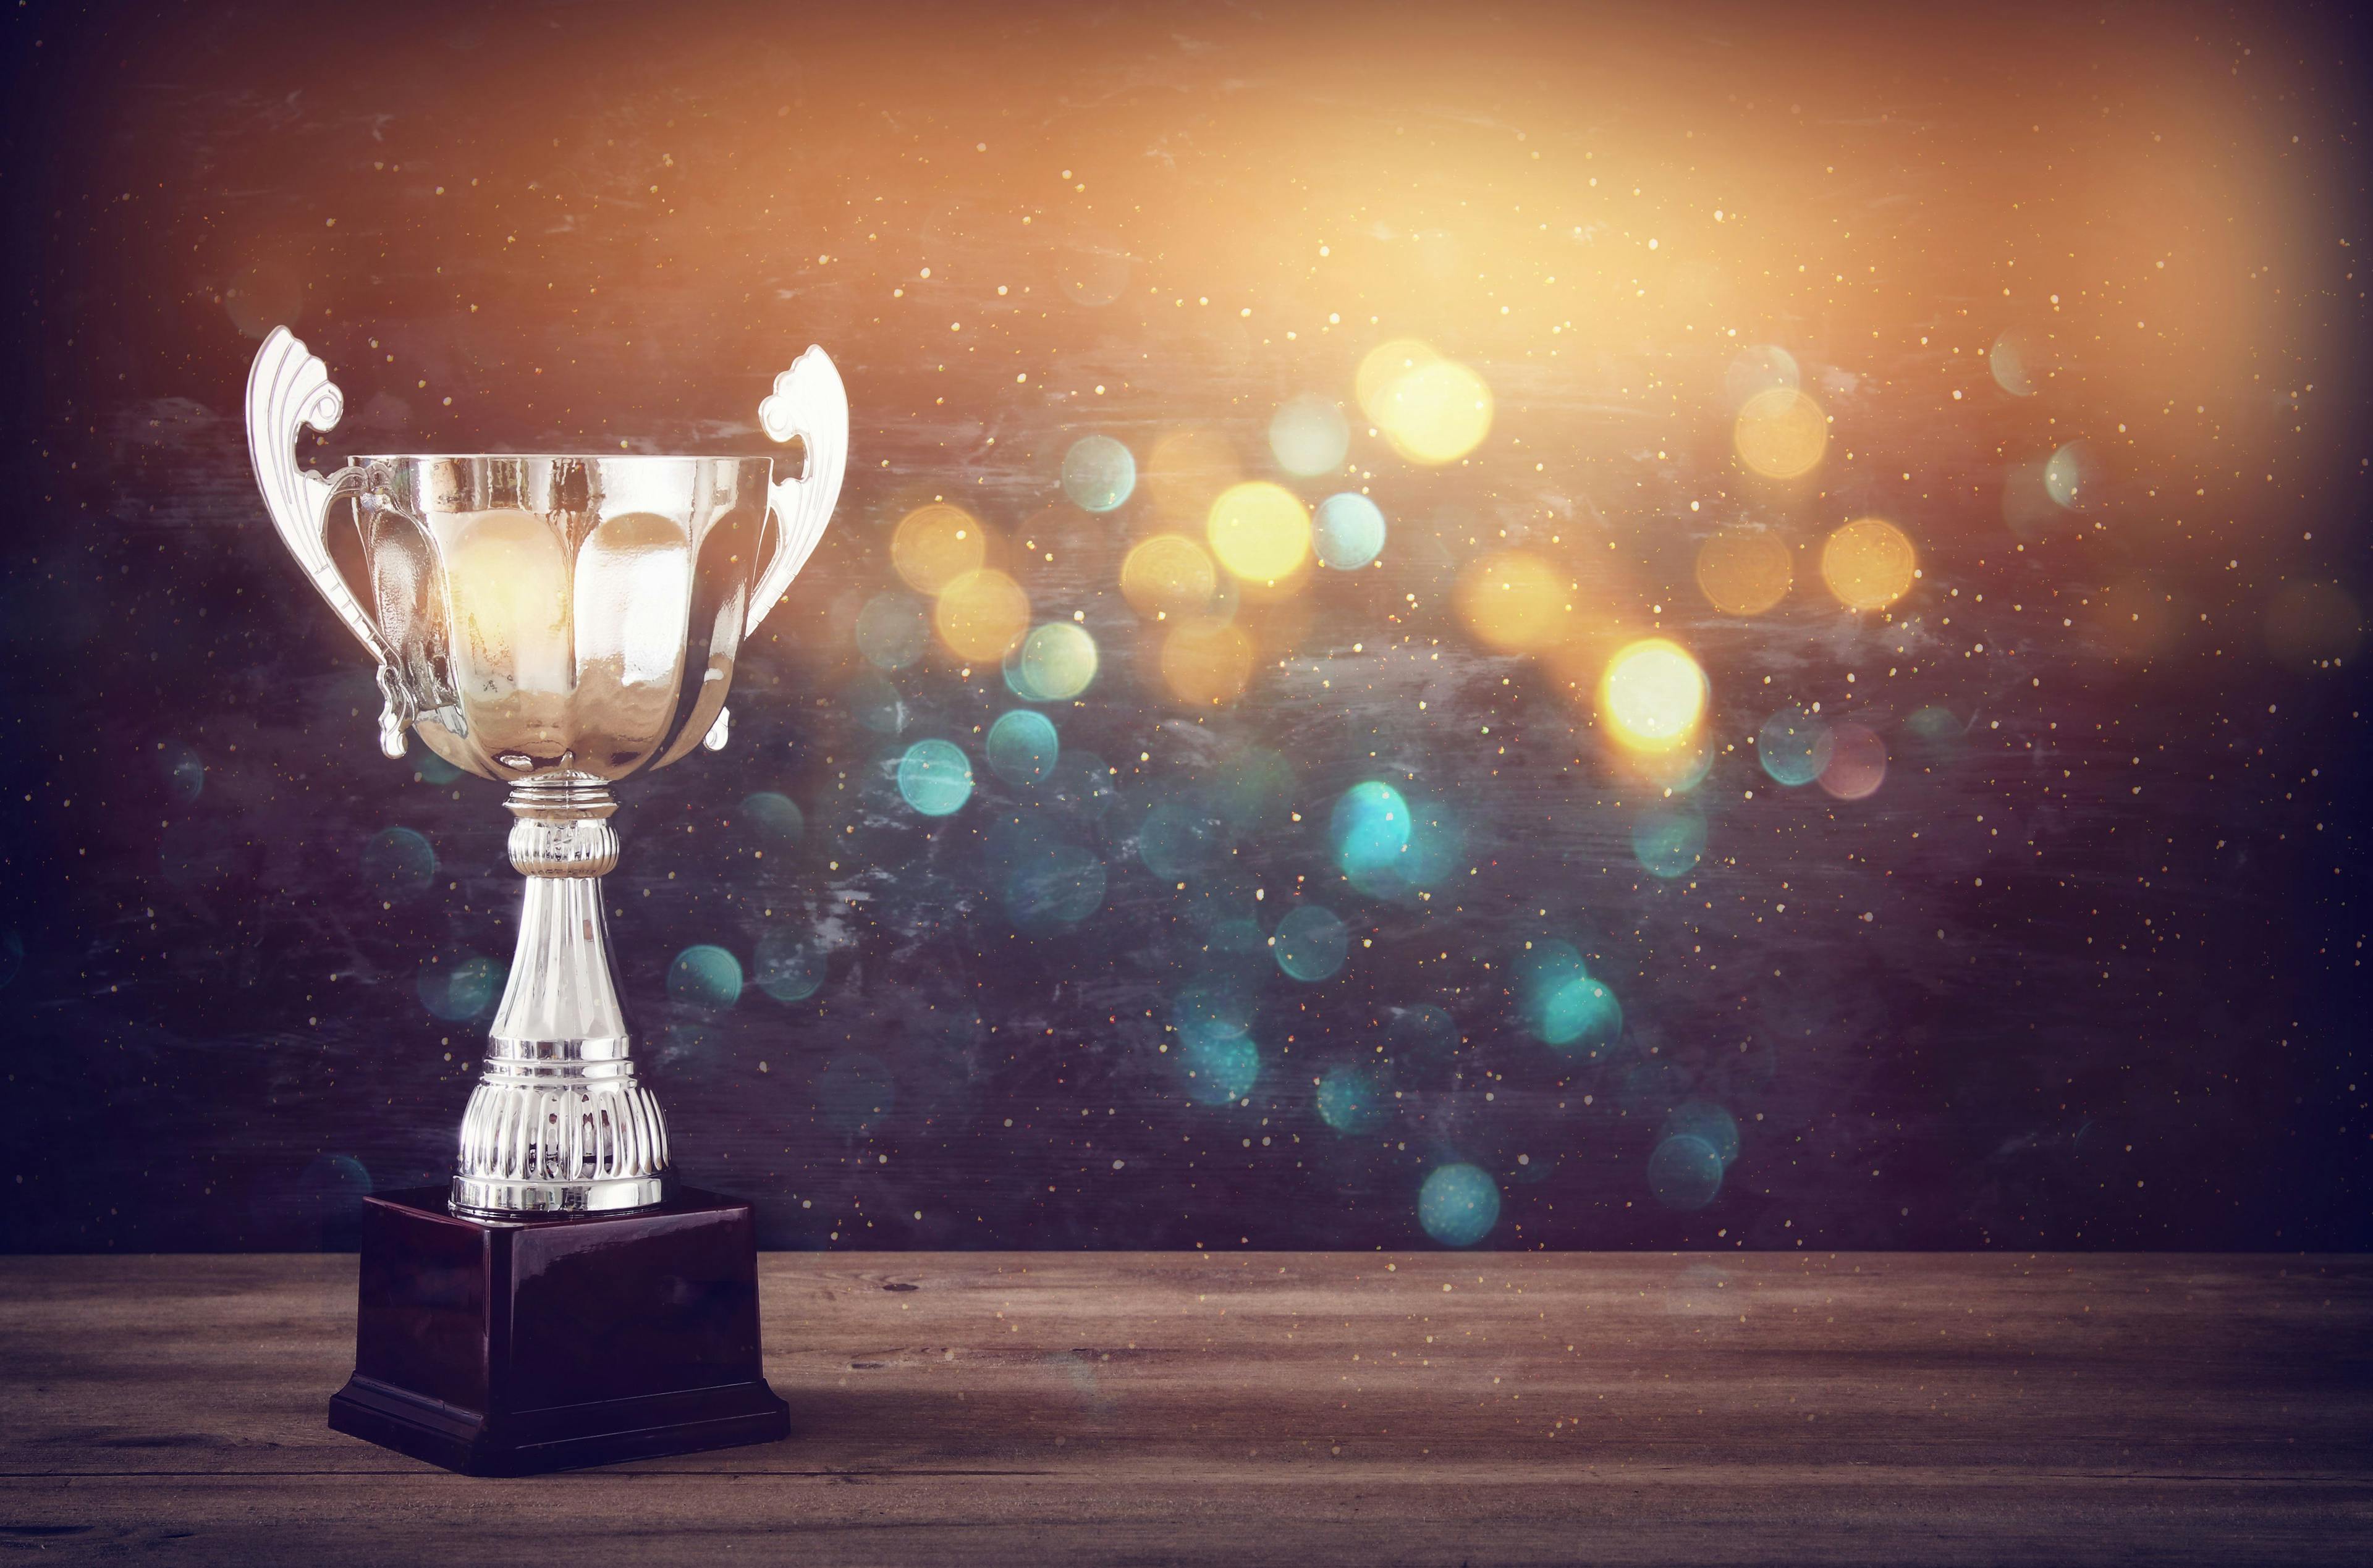 low key image of trophy over wooden table and dark background | Image Credit: © tomertu - stock.adobe.com